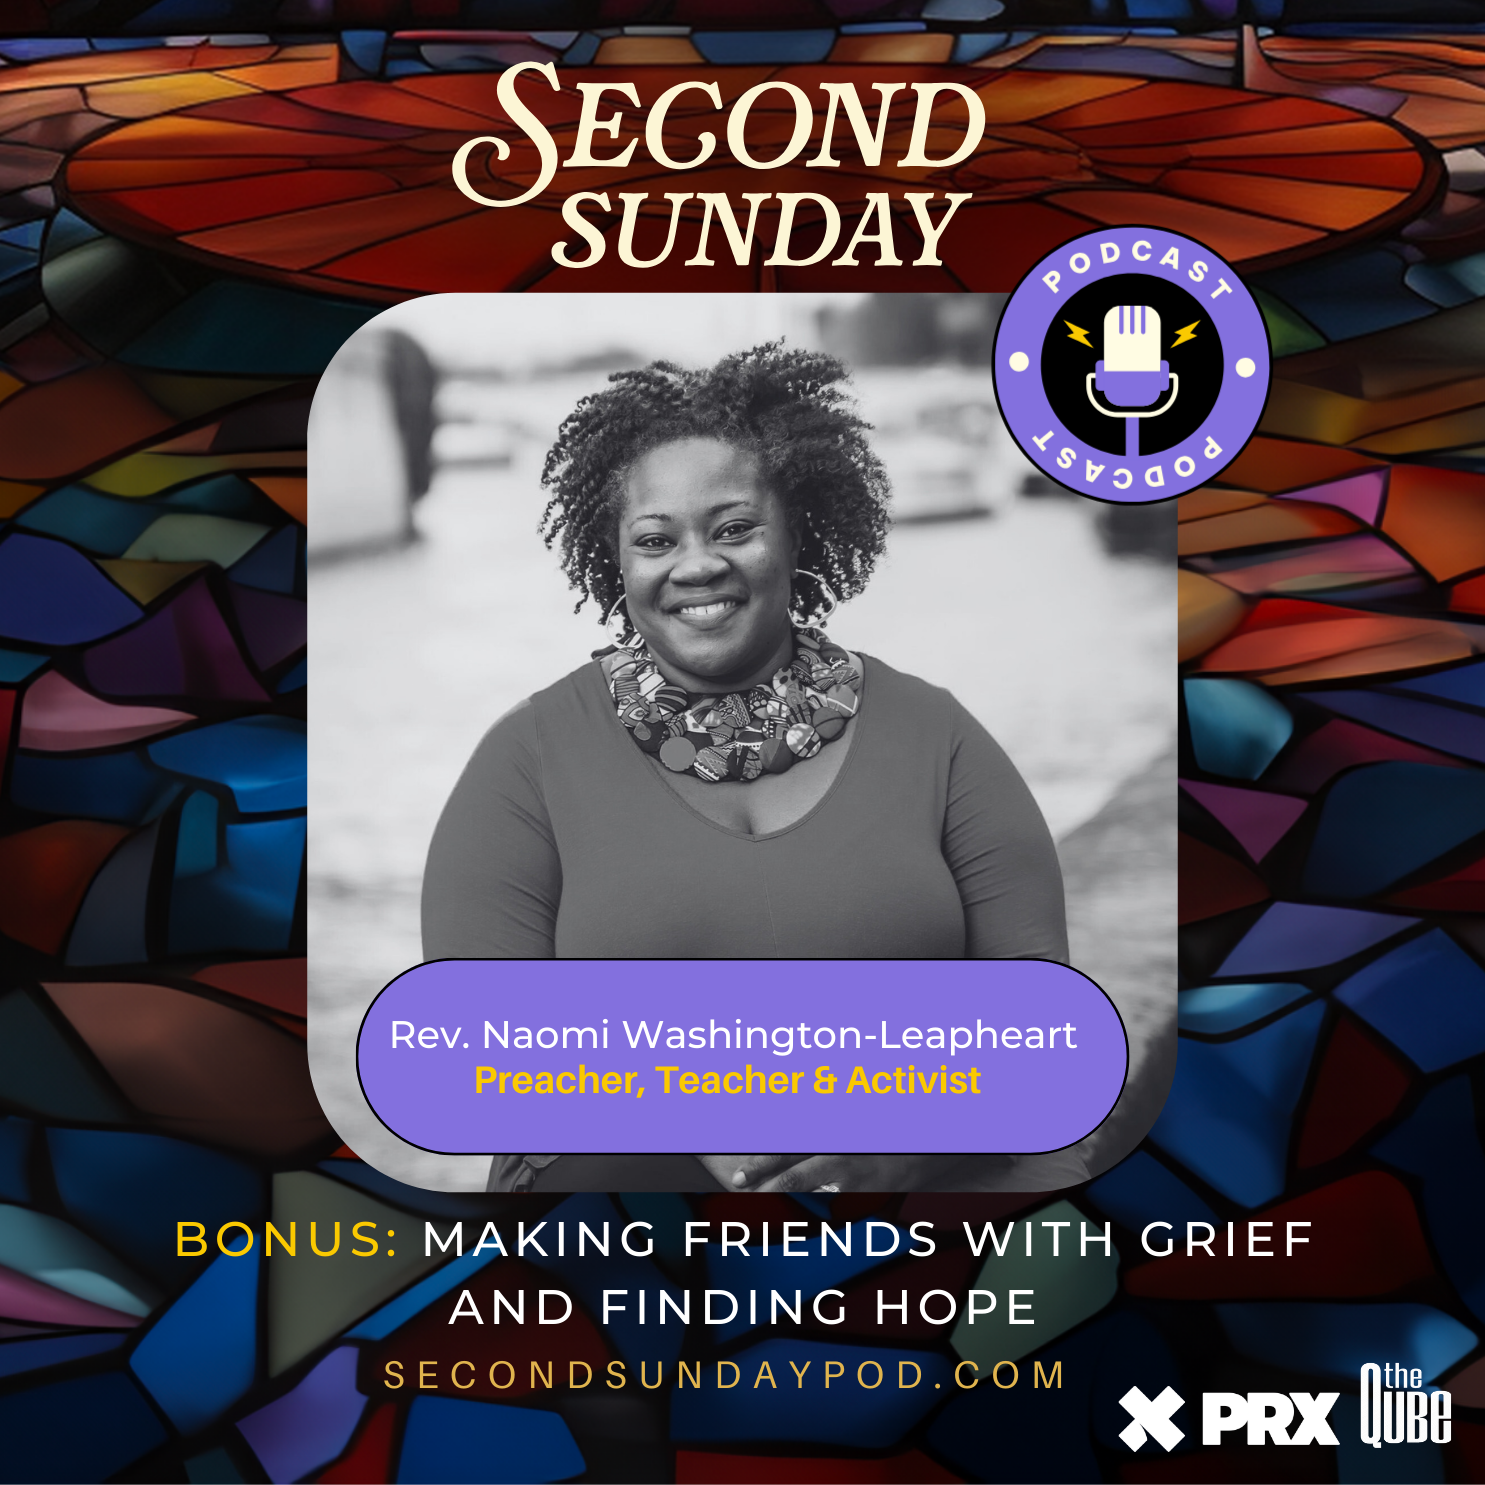 BONUS: Making Friends with Grief and Finding Hope with Rev. Naomi Washington-Leapheart